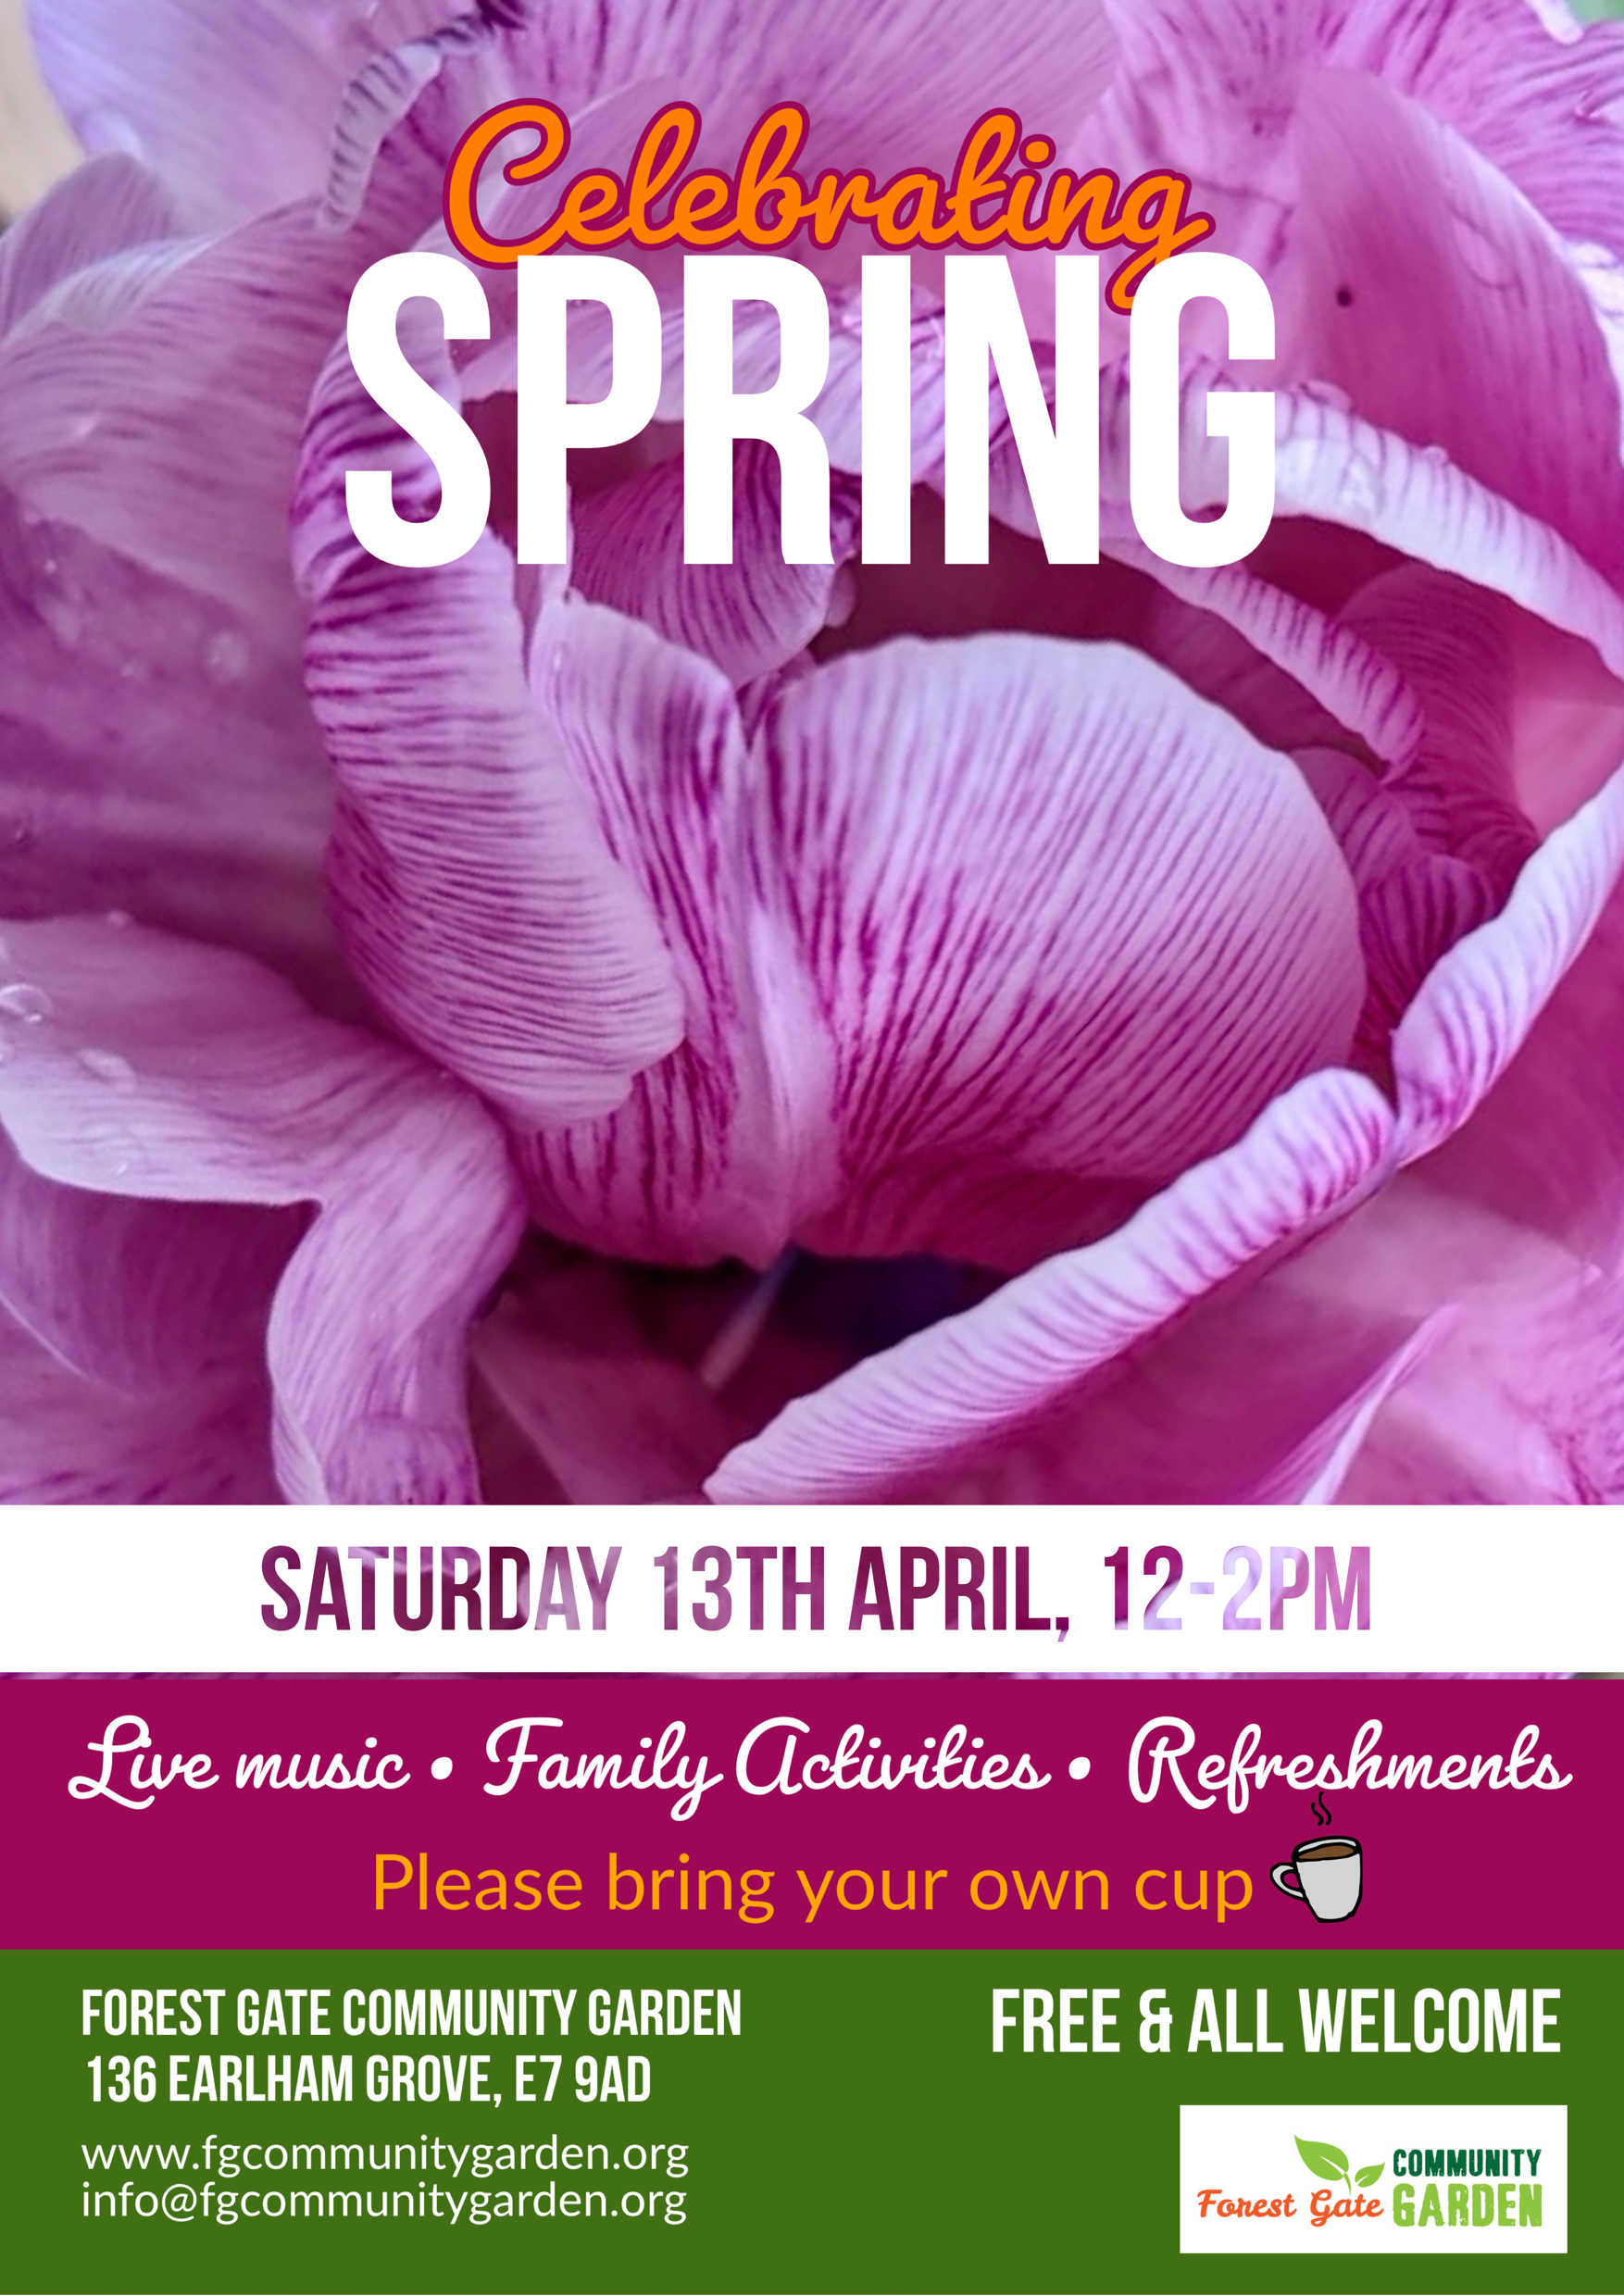 flyer for the upcoming \\spring \celebration in the garden. On Saturday 13th April from 12 - 2pm. all welcome and its Free.